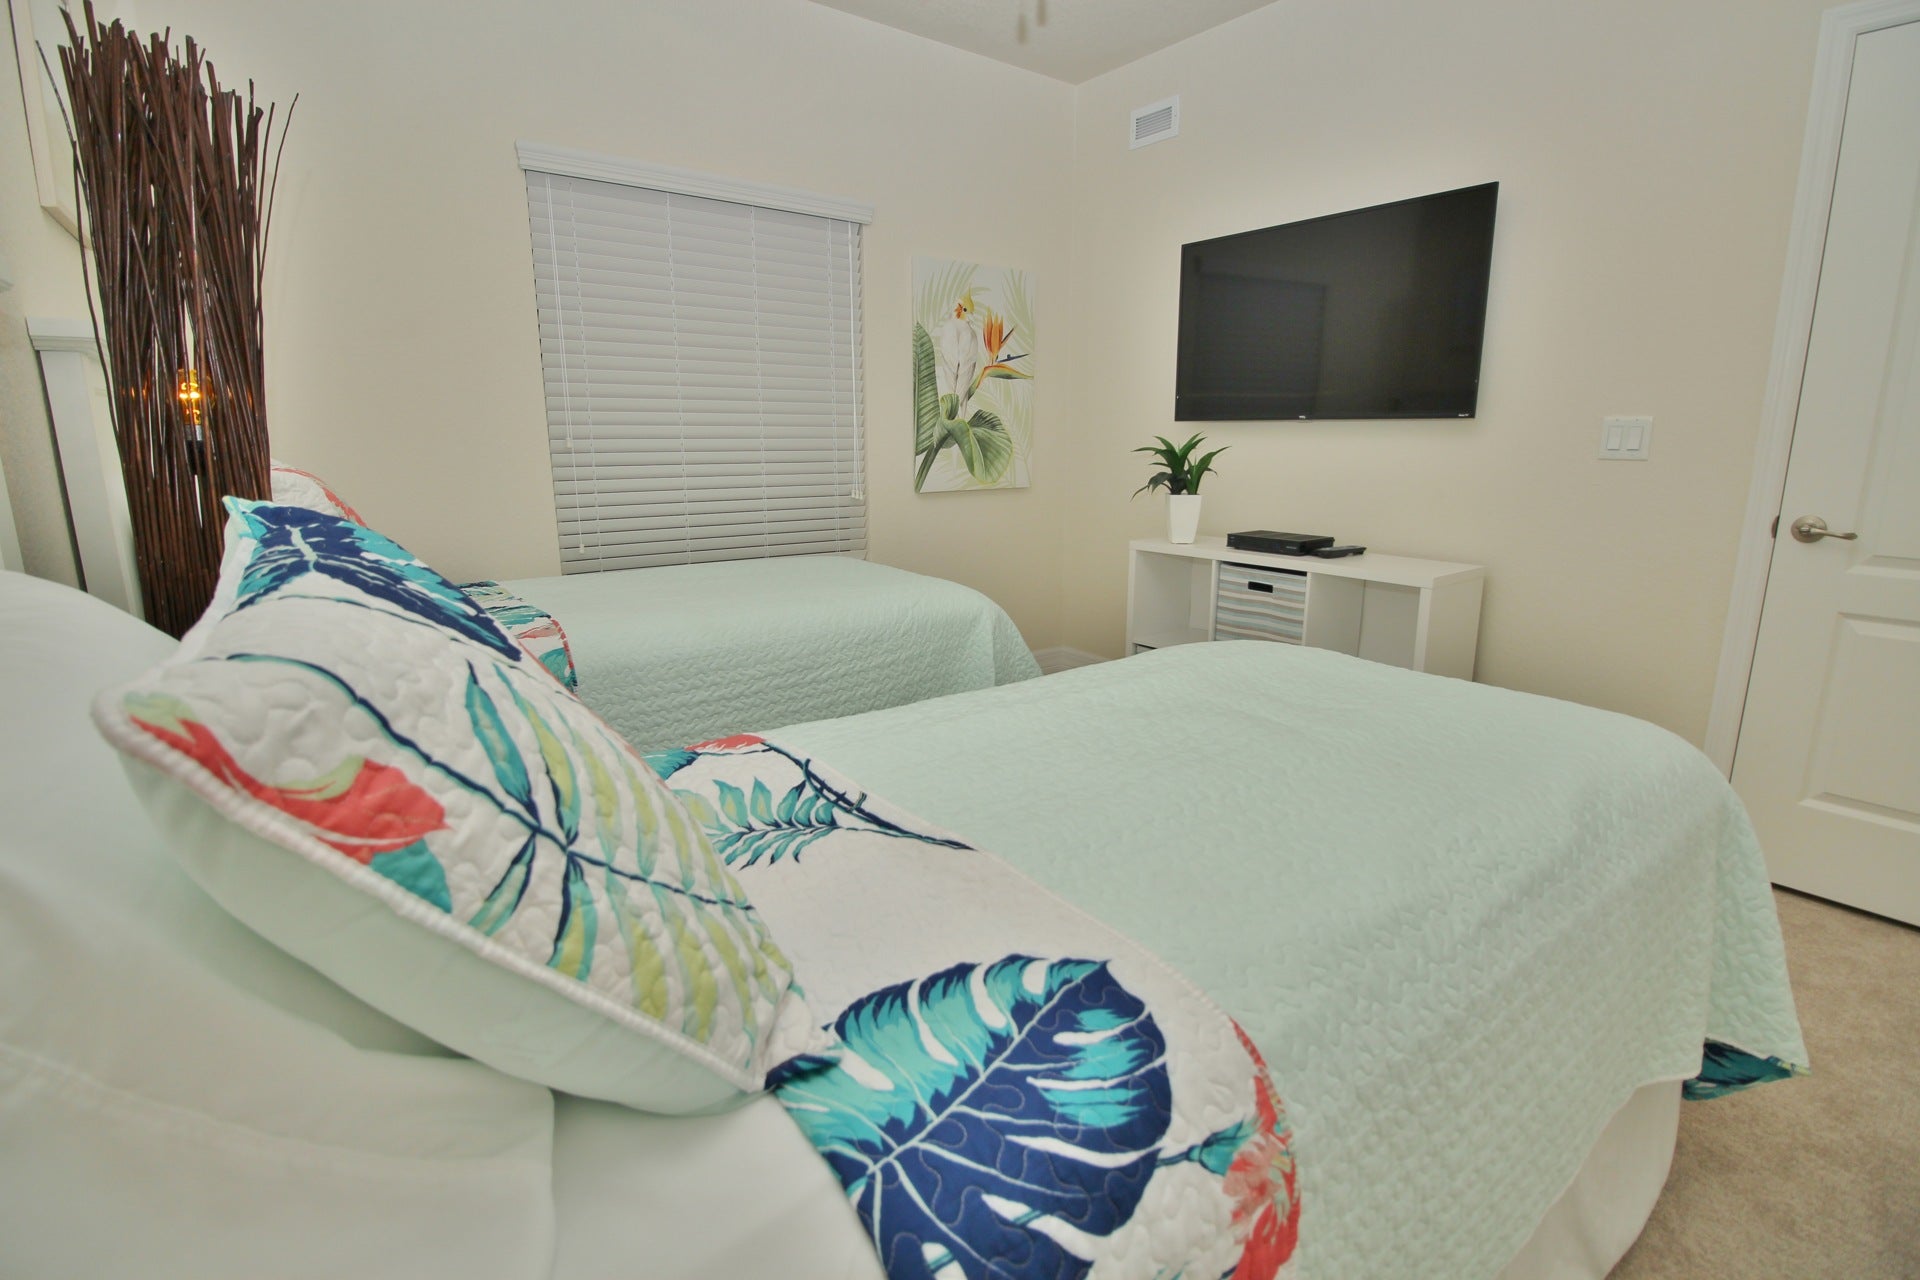 Tropical theme in third bedroom